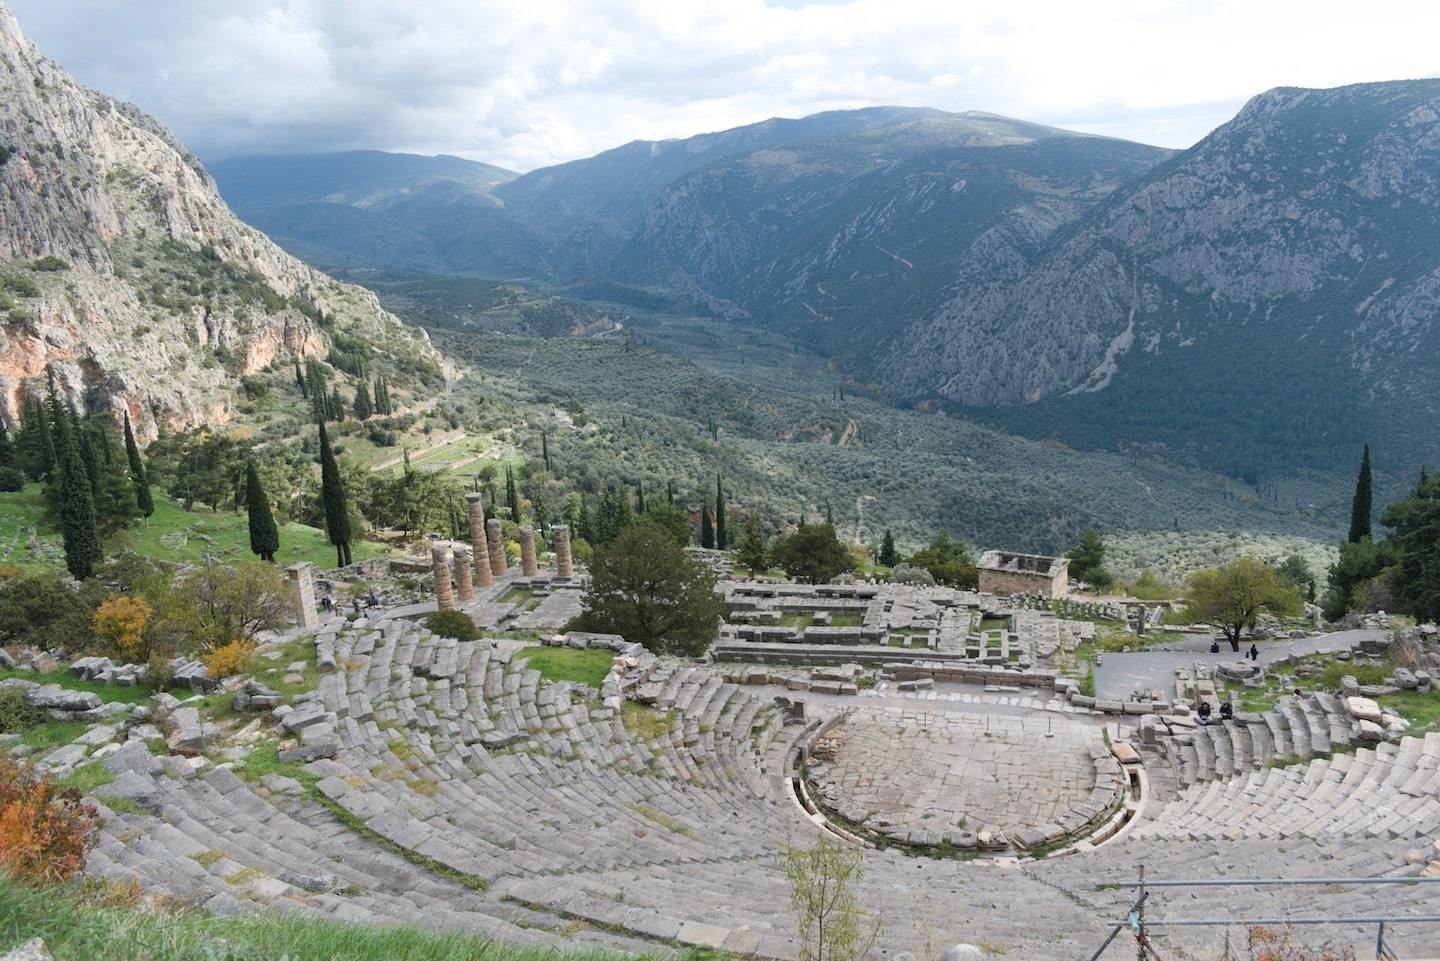 View of an Ancient Greek theater surrounded by mountains in Delphi, Greece.